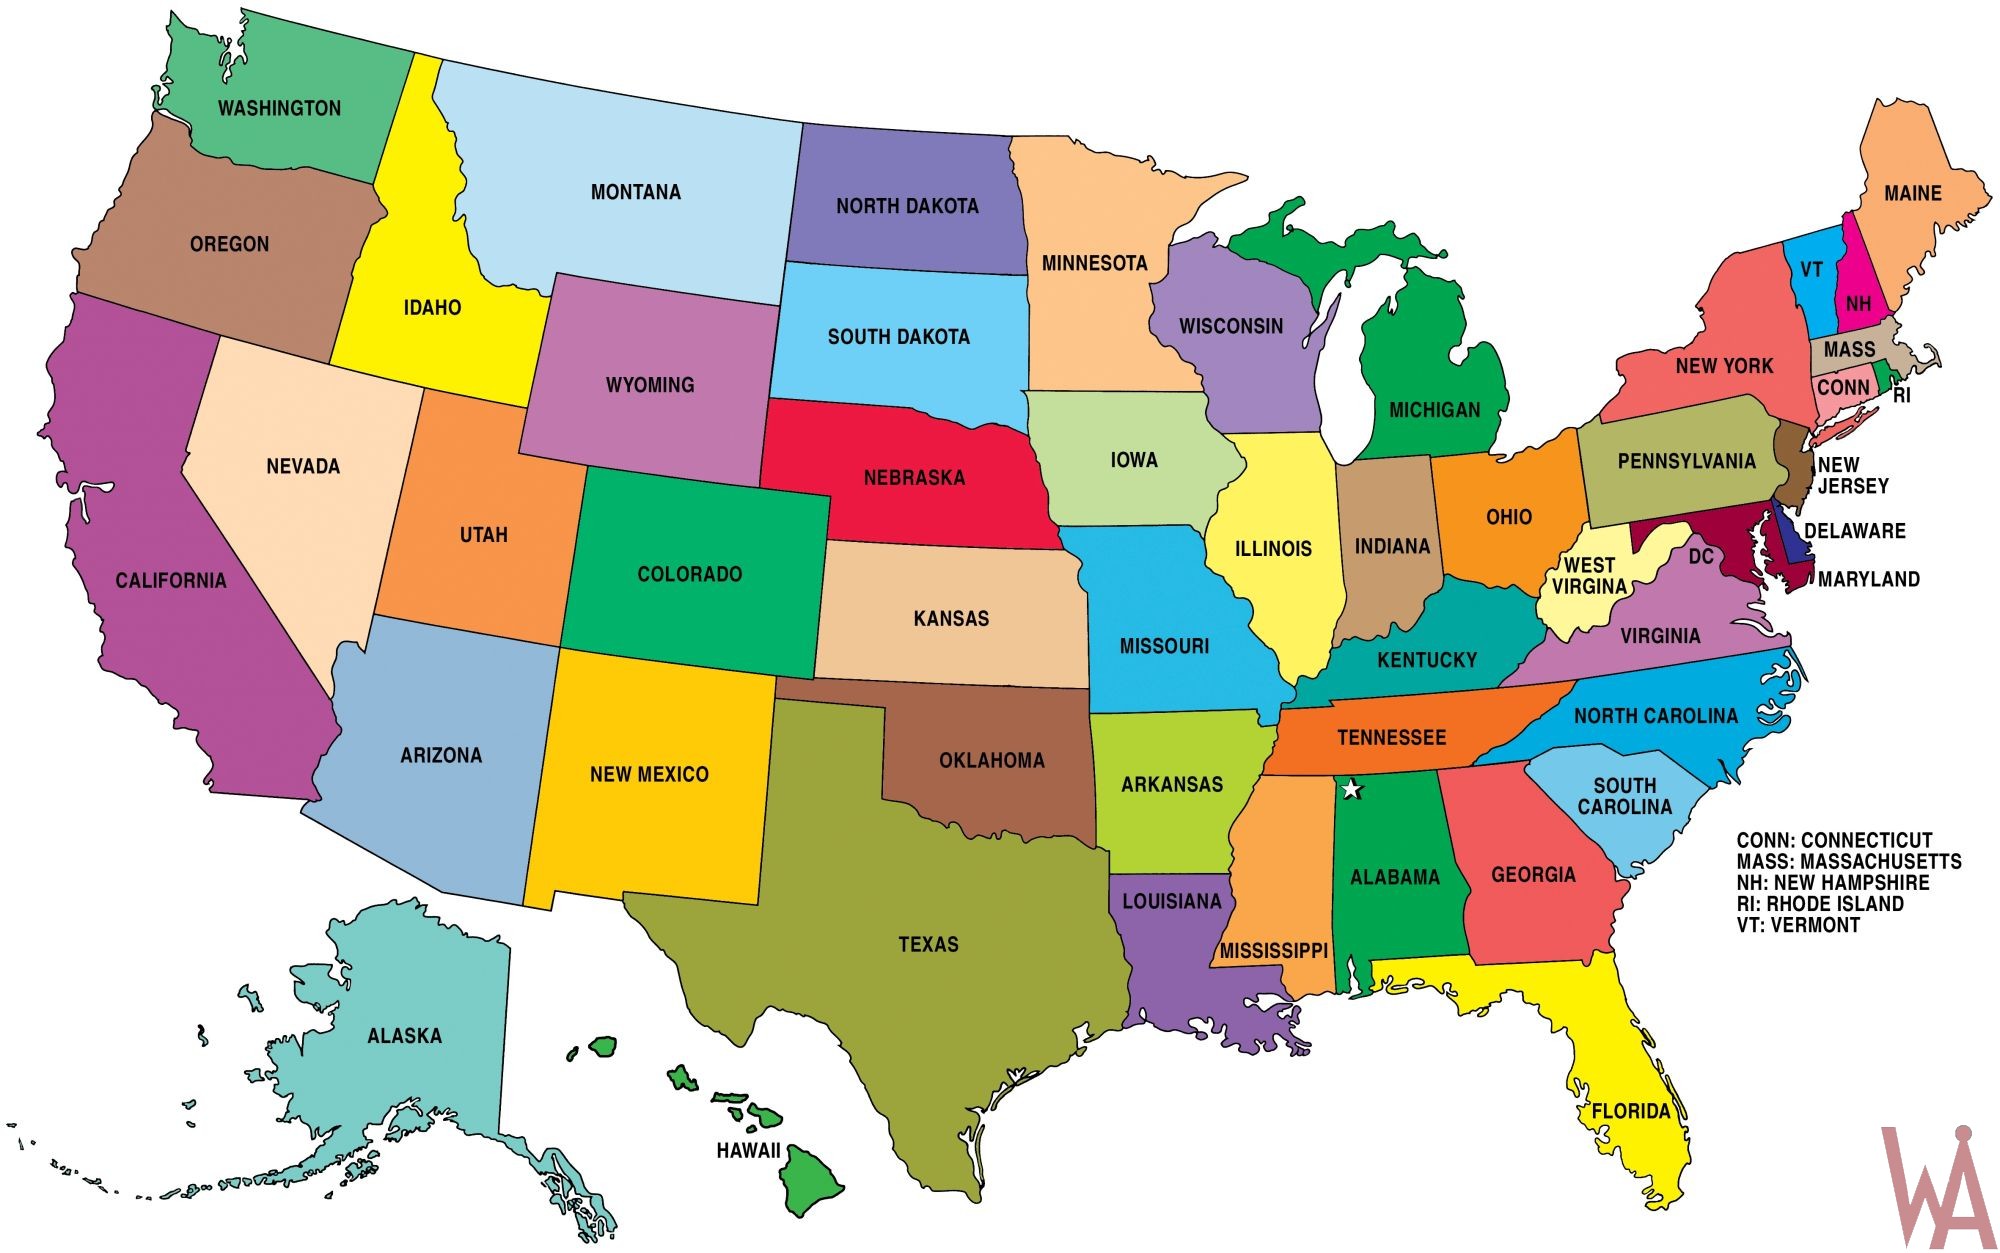 Wallmaps of the United States in 2022